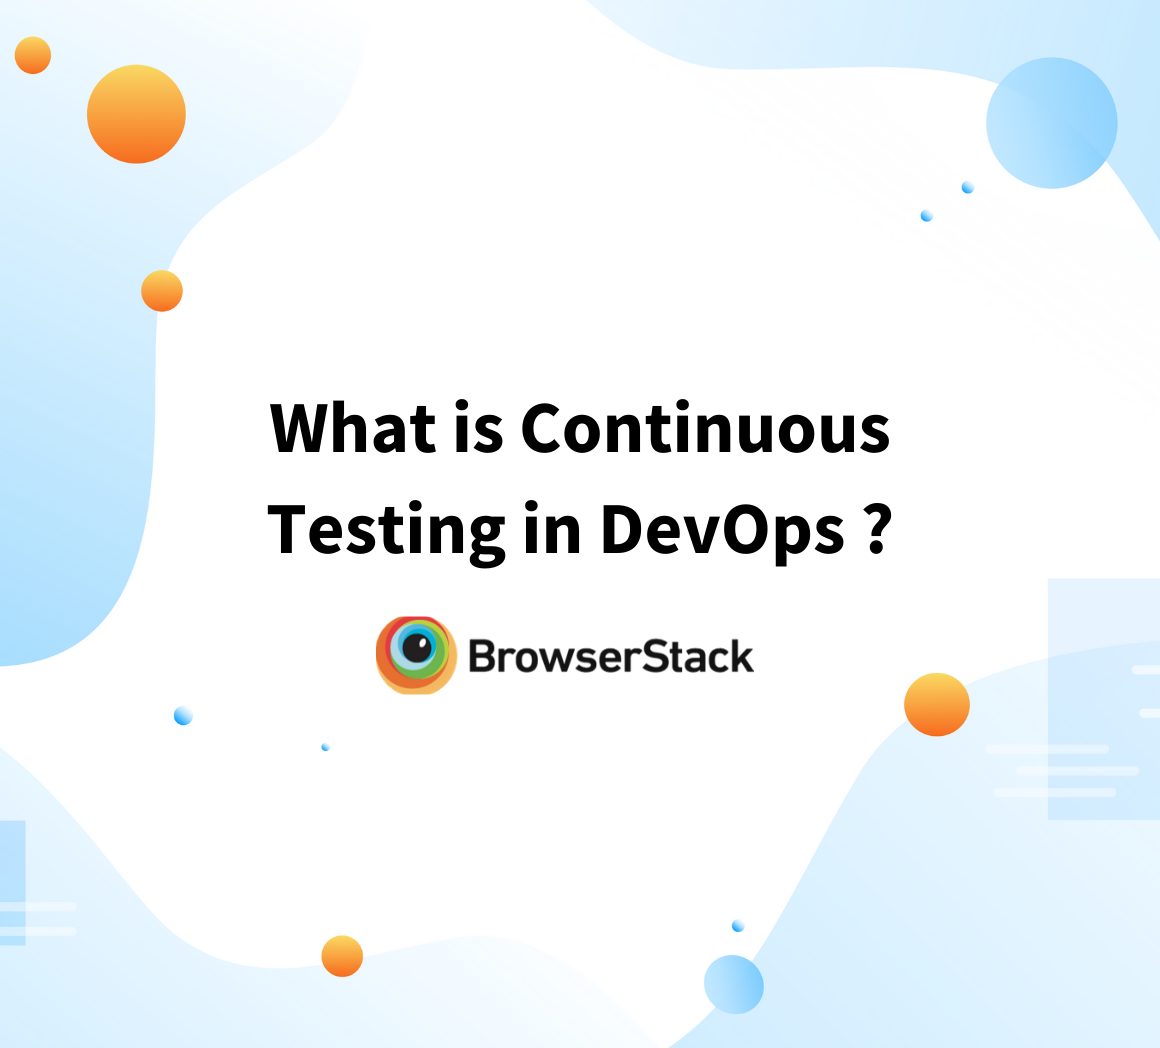 What is Continuous Testing in DevOps